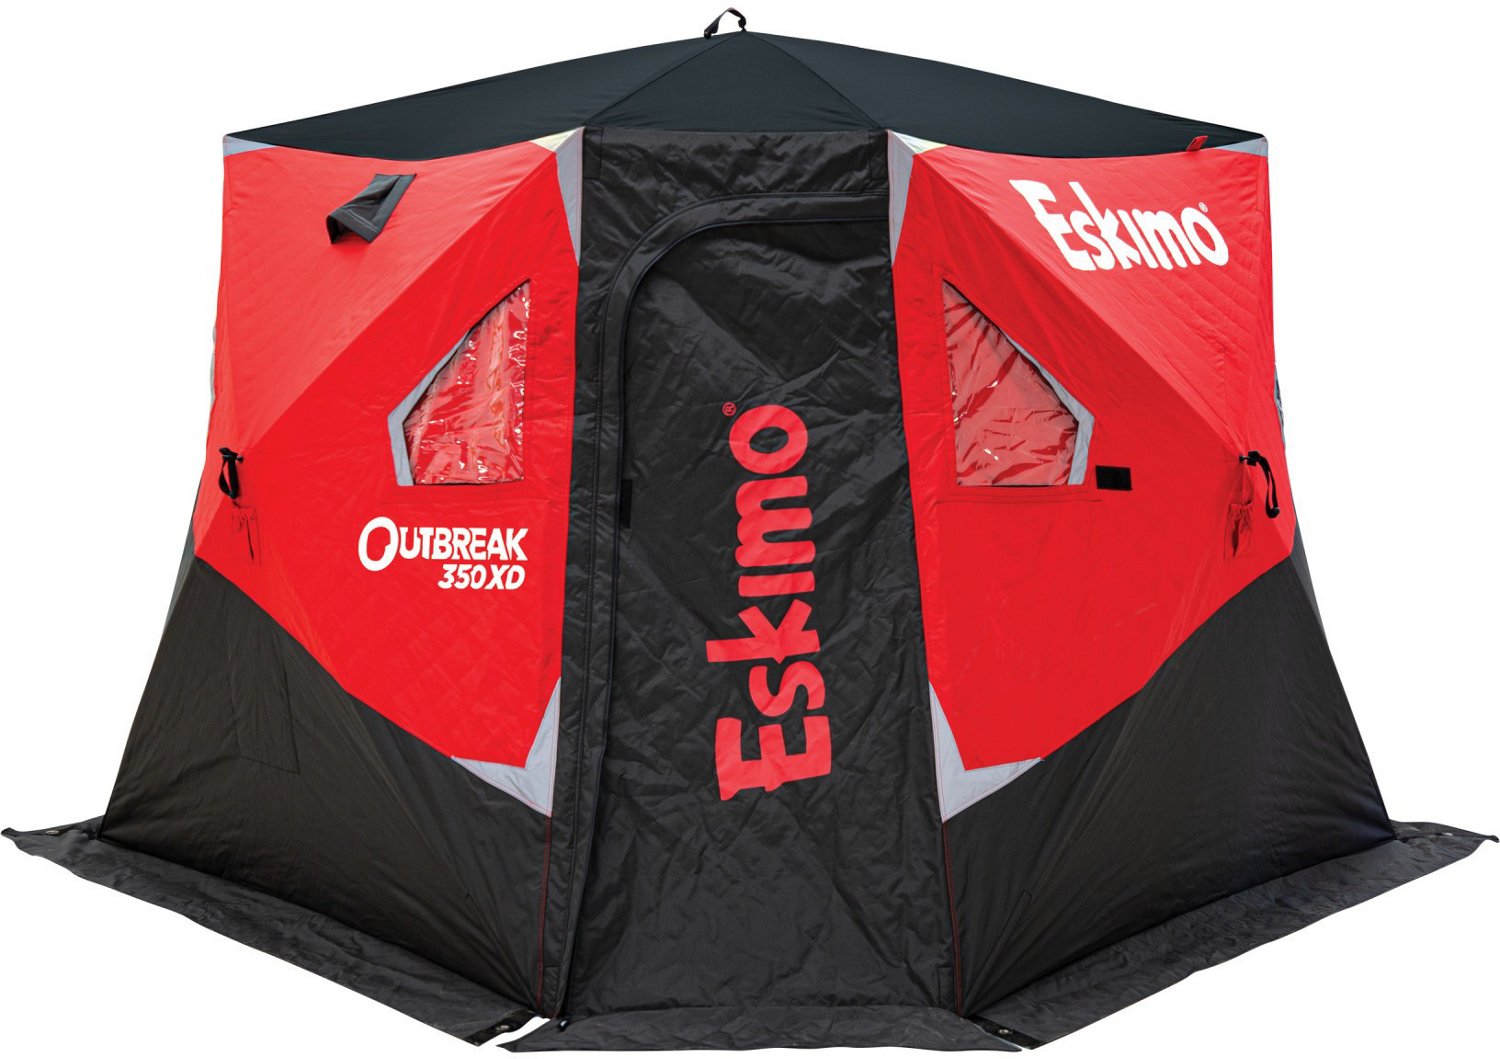 Eskimo Outbreak 350XD Insulated Wide Bottom Pop Up Portable Shelter